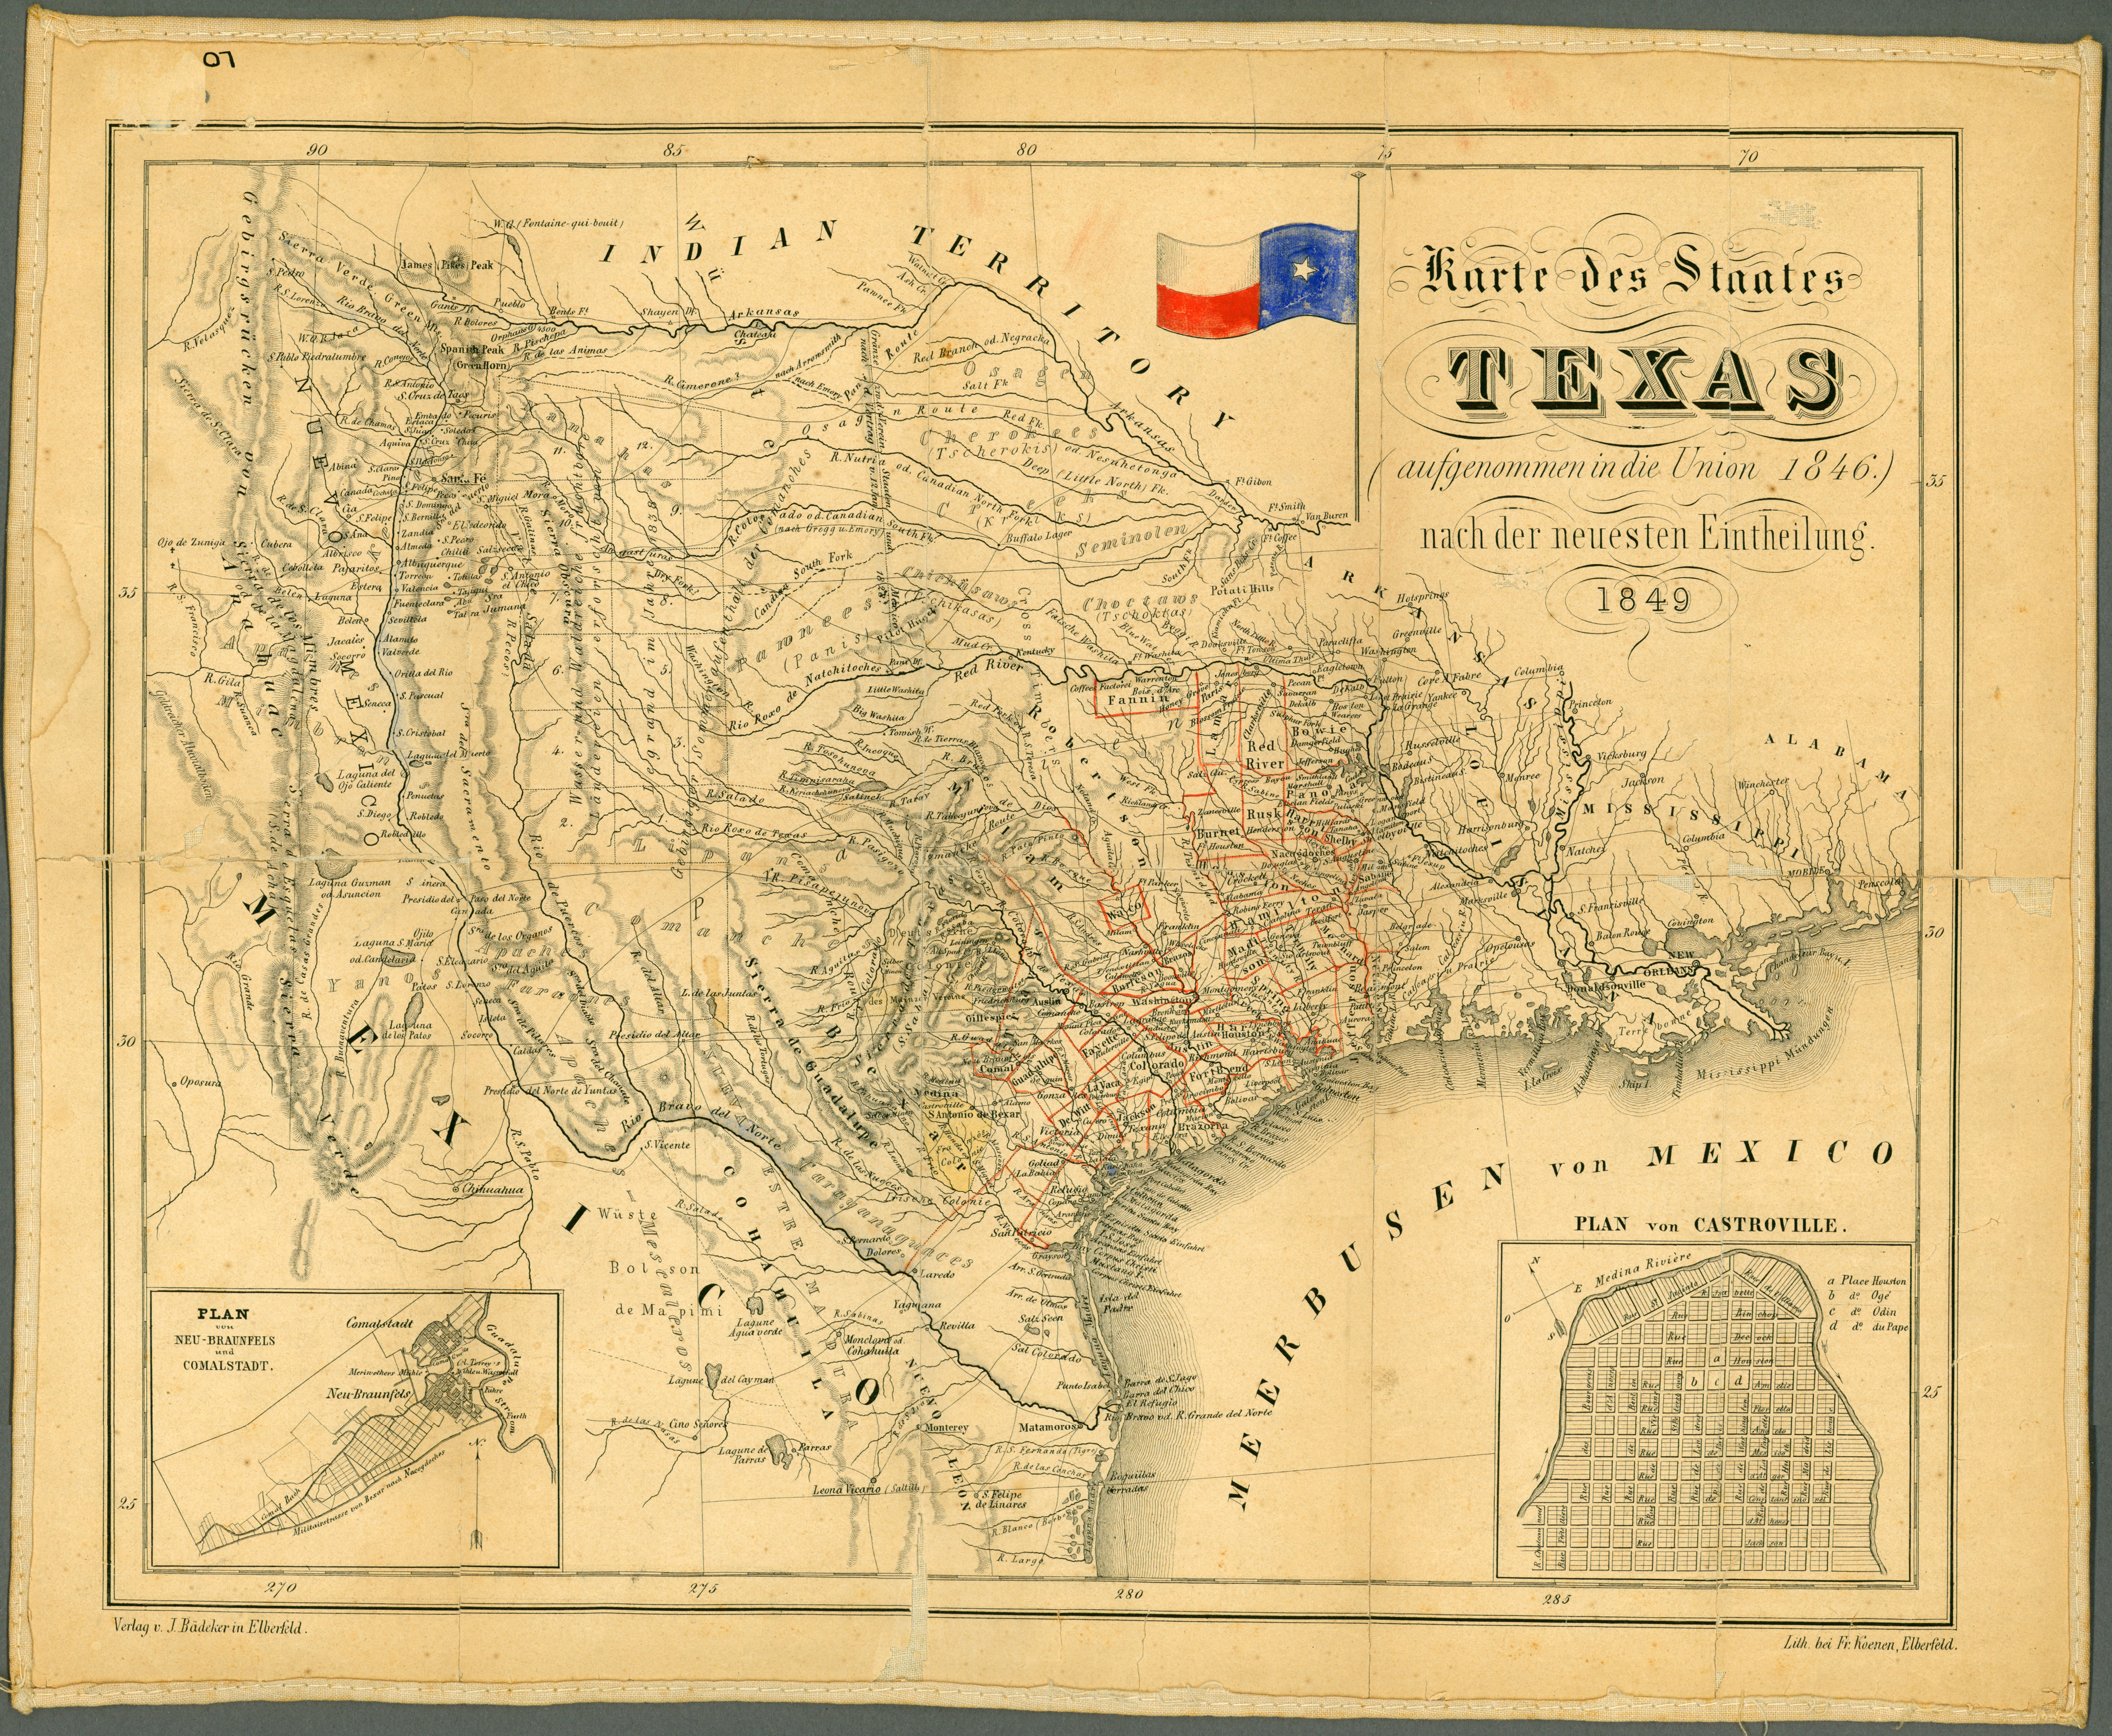 Texas Historical Maps - Perry-Castañeda Map Collection - UT Library Online